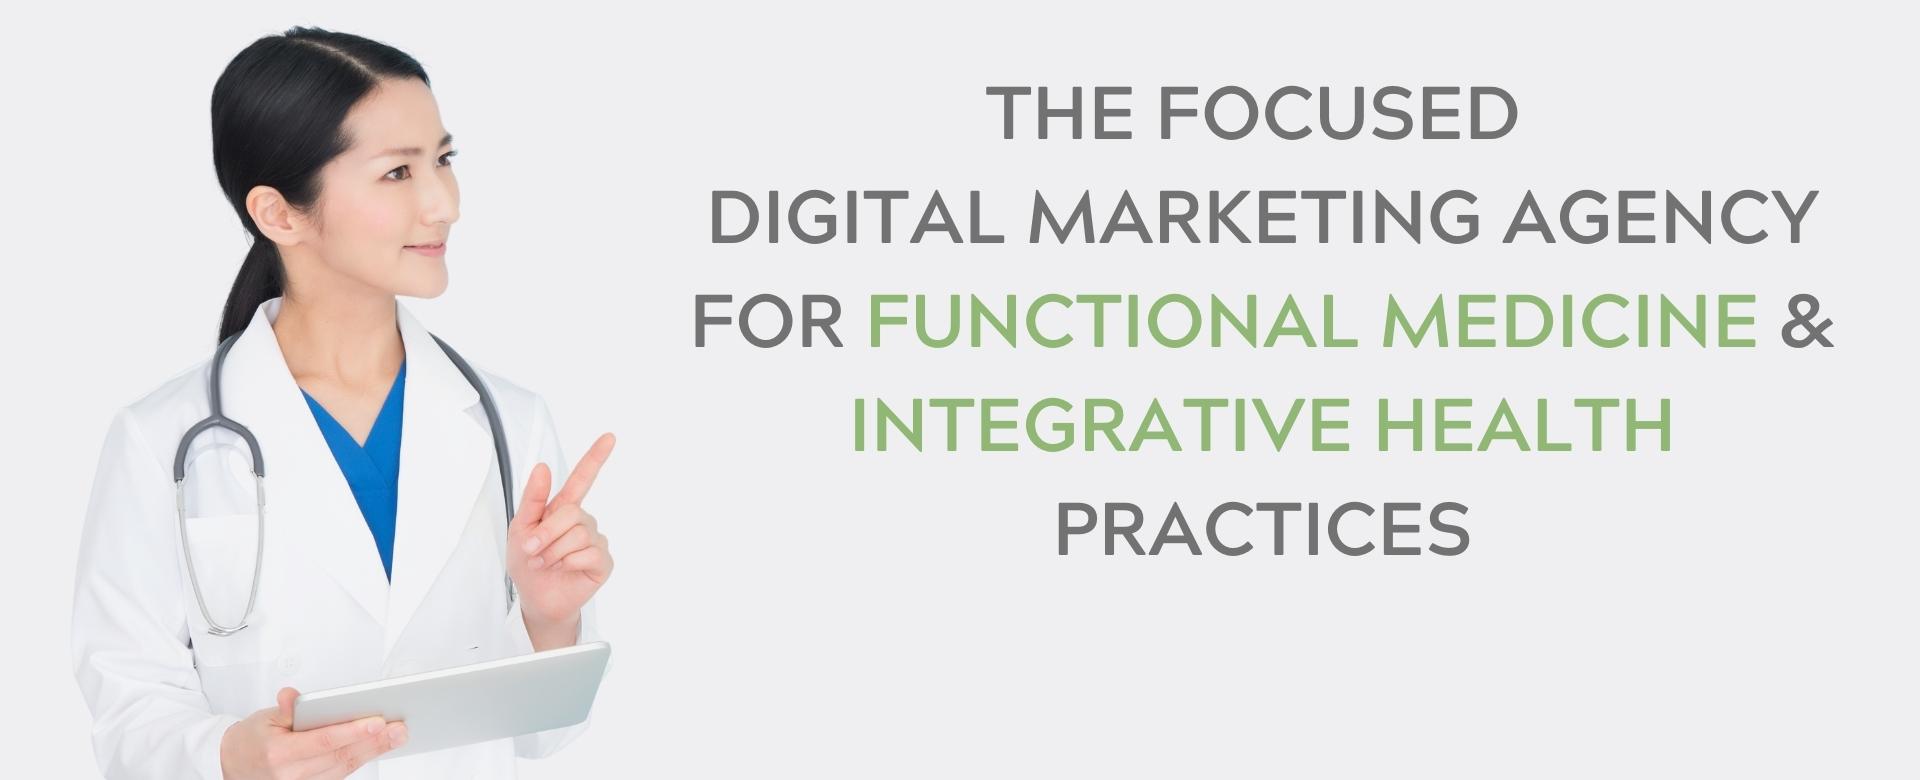 Root Cause Functional Medicine Marketing - The Focused Digital Marketing Agency for Functional Medicine and Integrative Health Practices